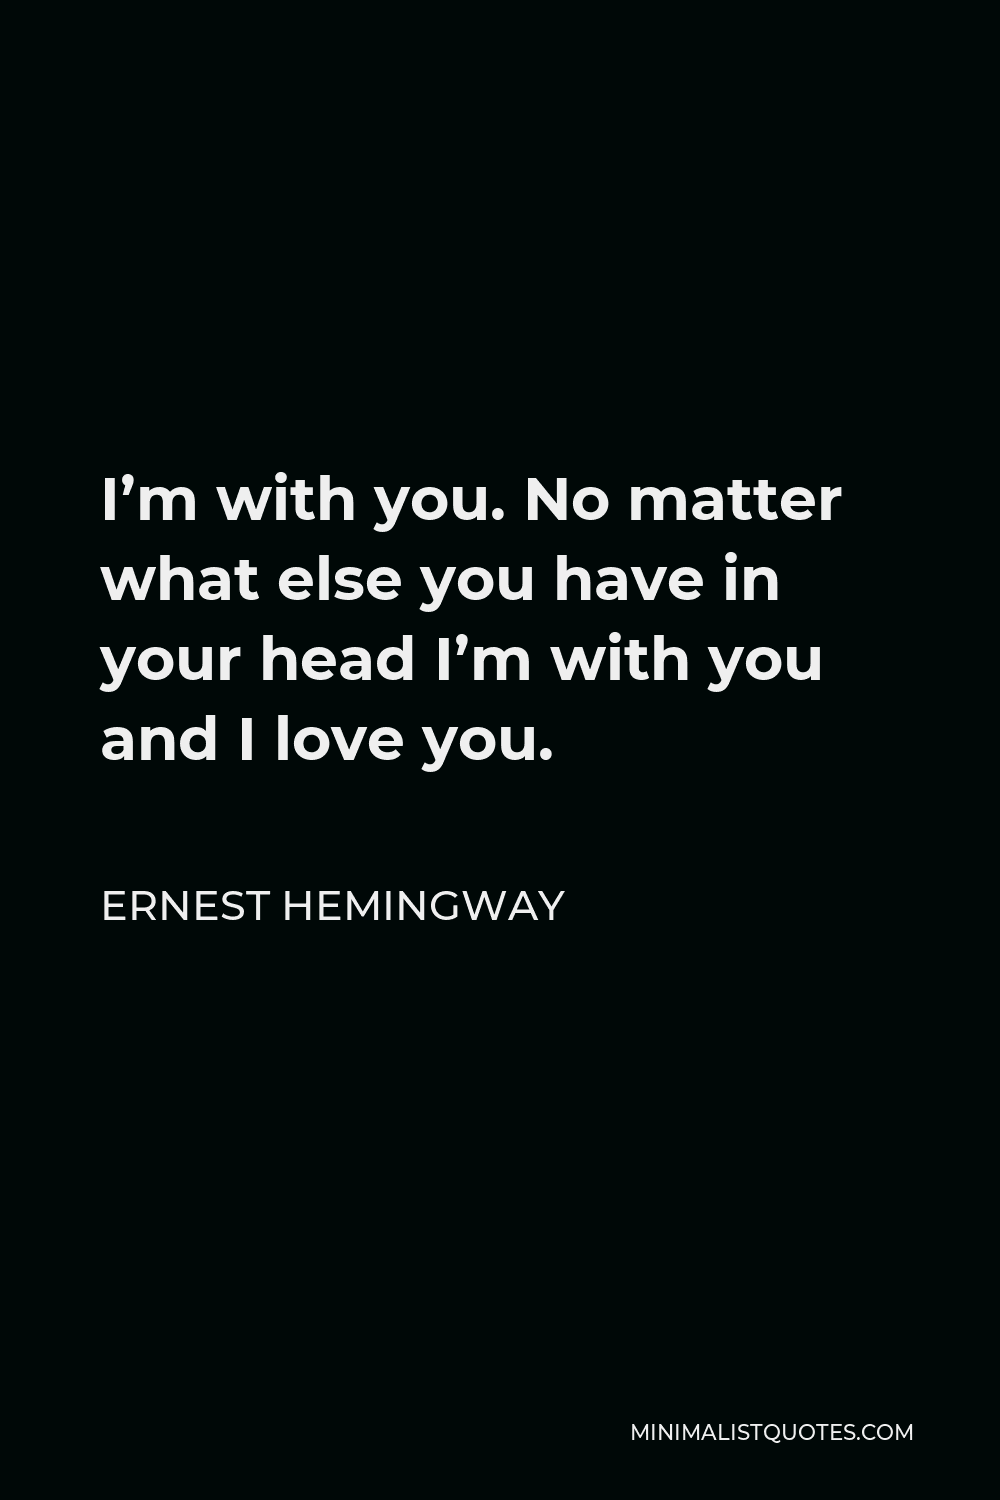 Ernest Hemingway Quote - I’m with you. No matter what else you have in your head I’m with you and I love you.